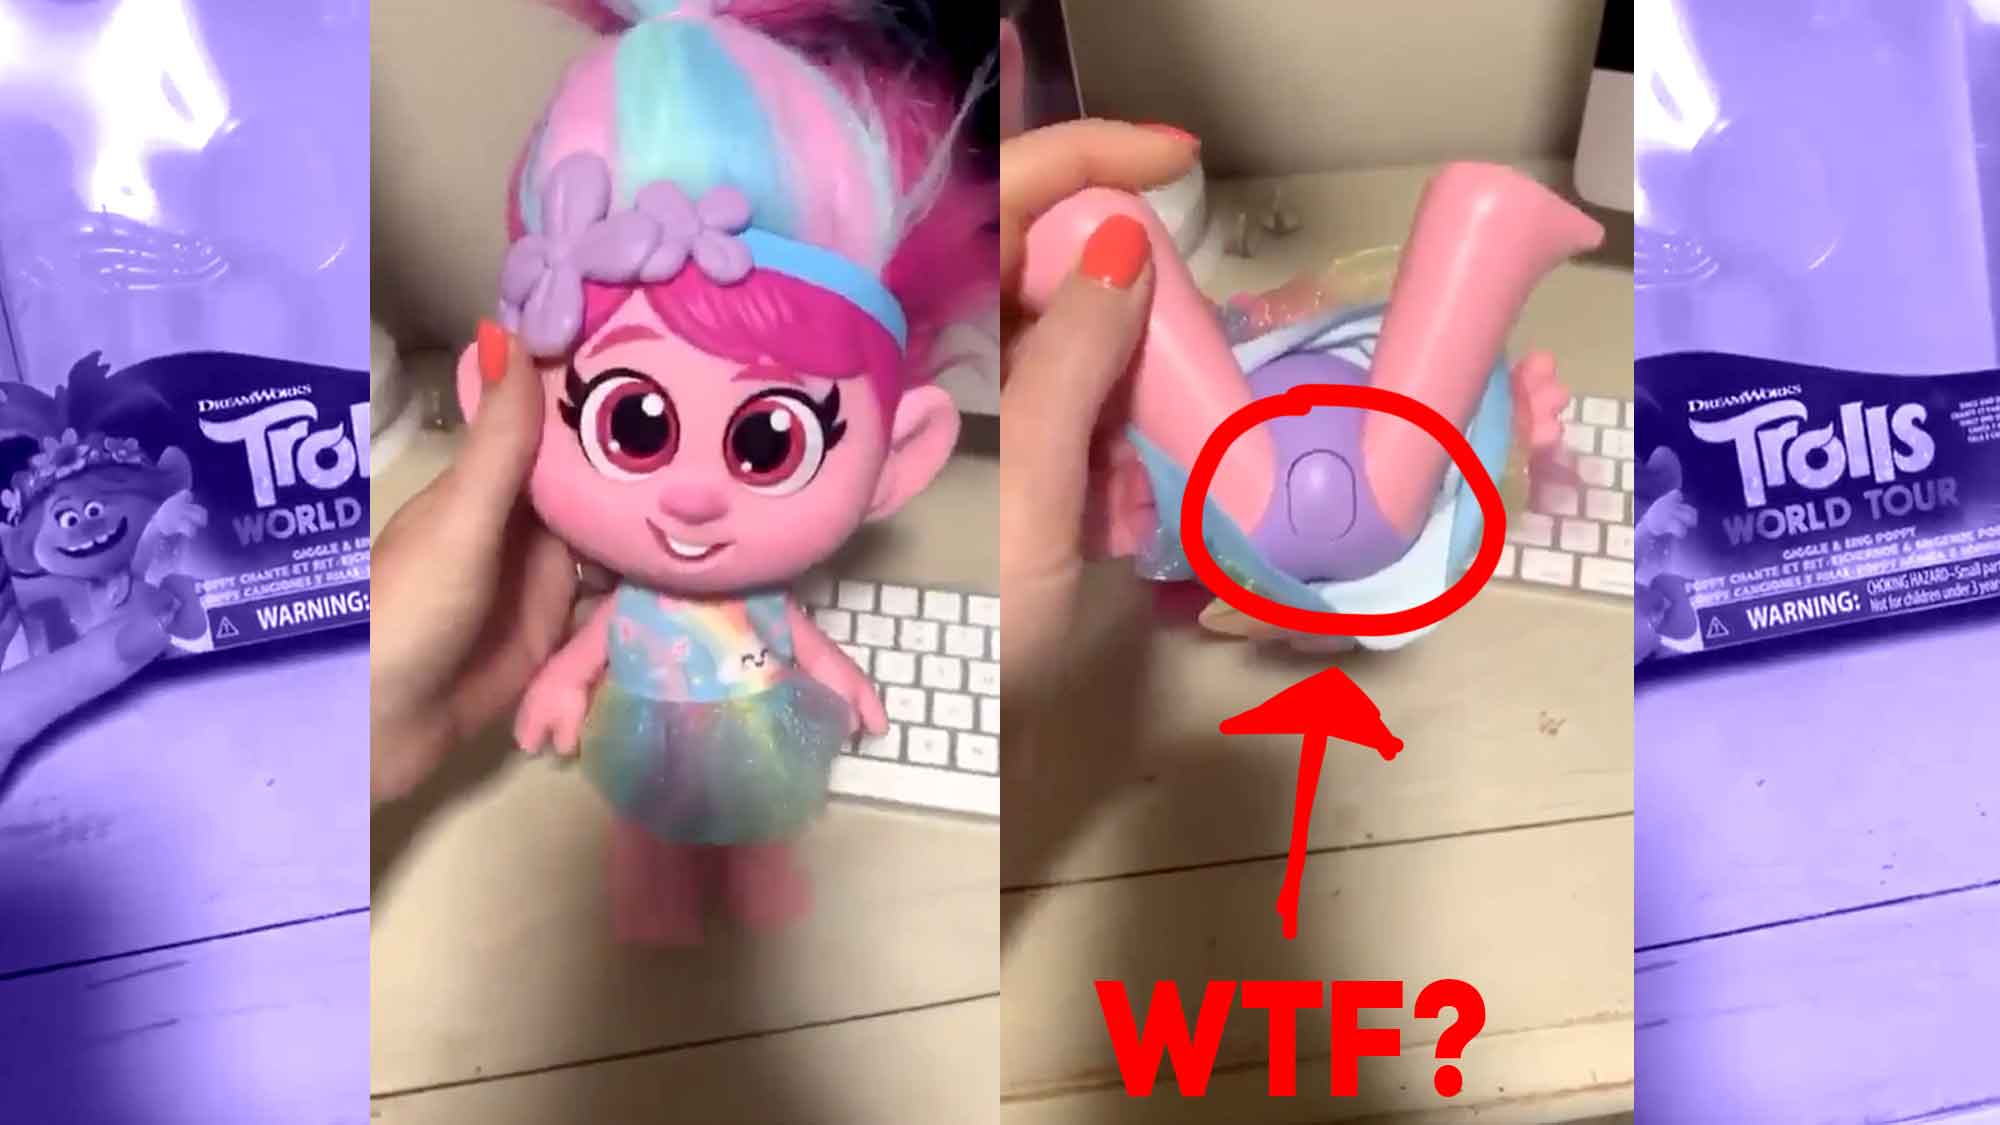 Inappropriate 'Vagina Button' On The Poppy Trolls Doll Outrages Parents